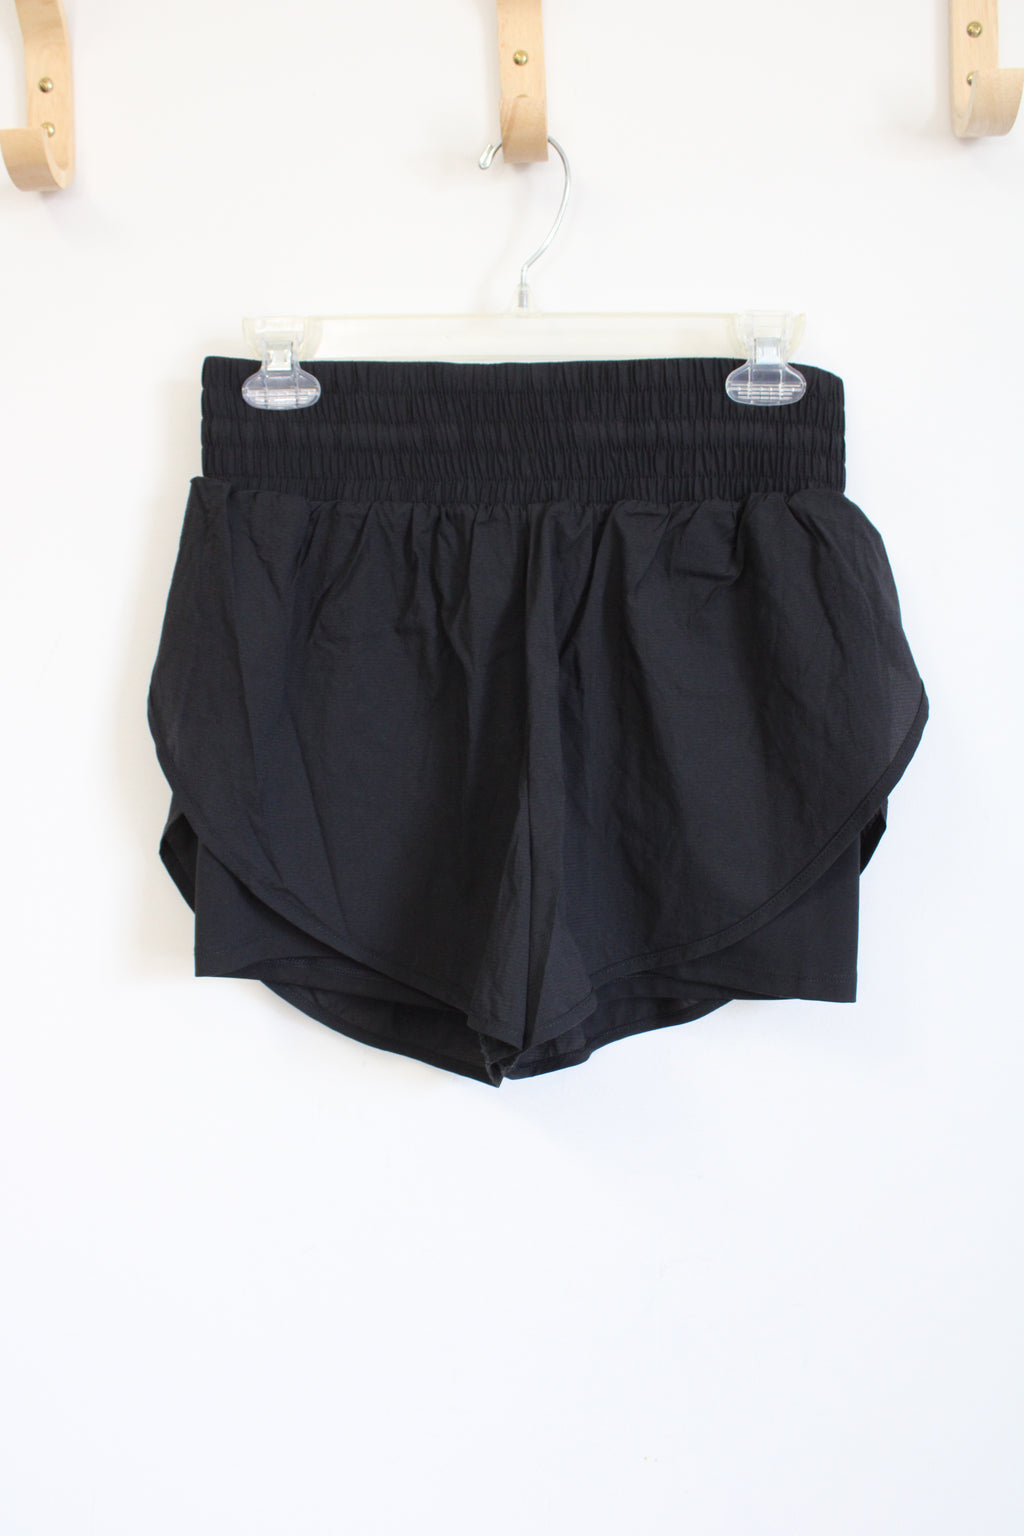 NEW All In Motion Black Athletic Lined Short | S